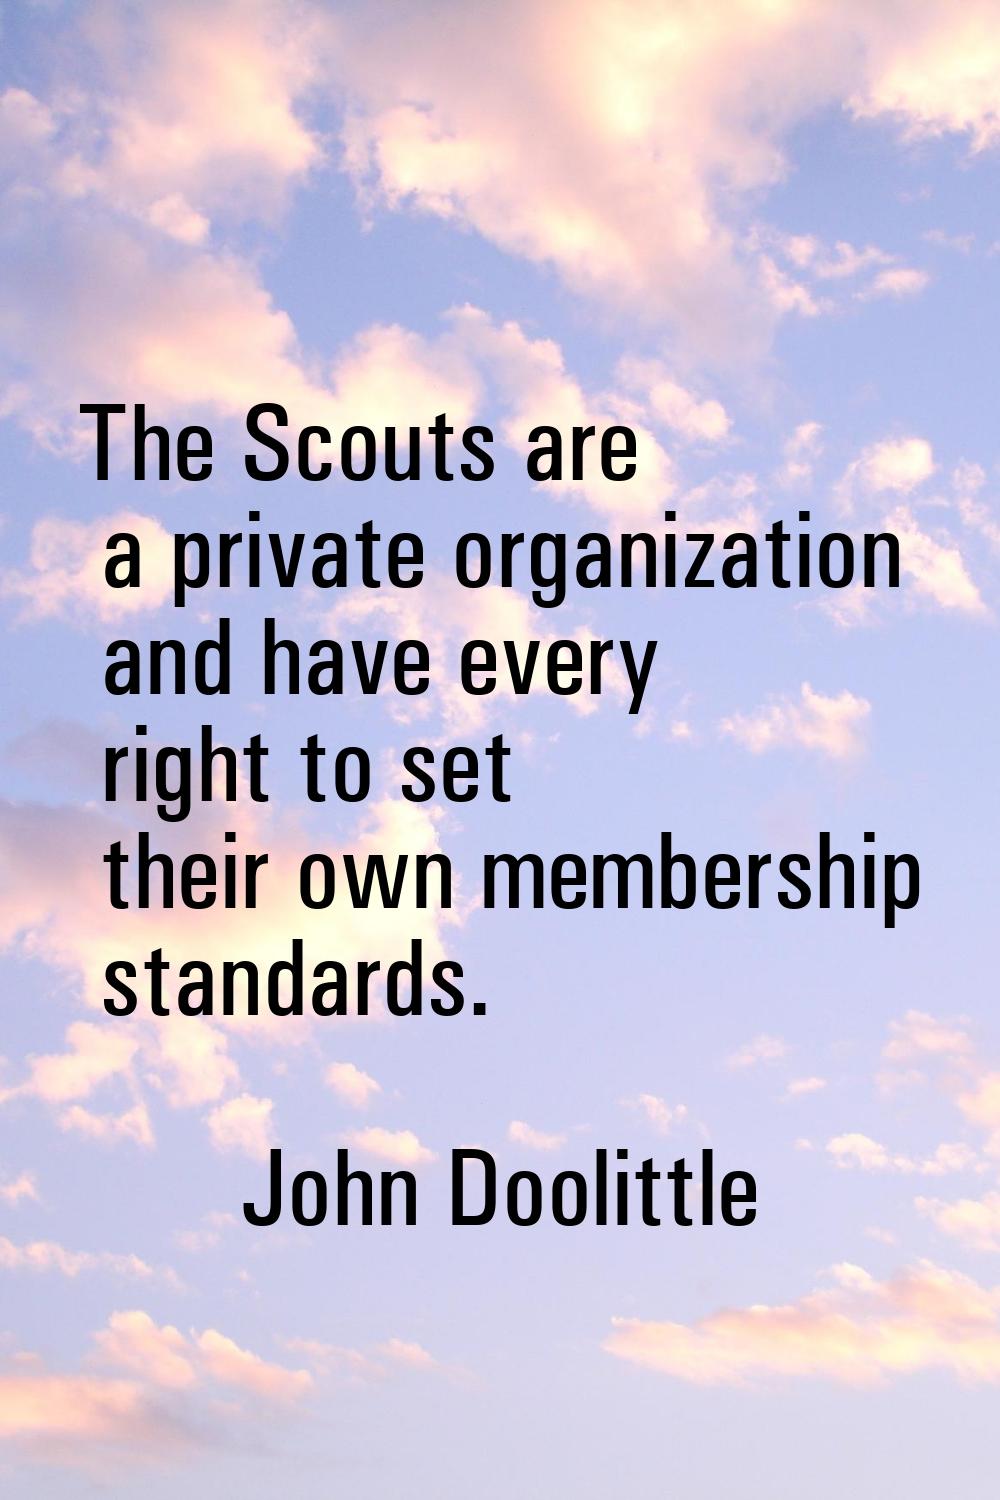 The Scouts are a private organization and have every right to set their own membership standards.